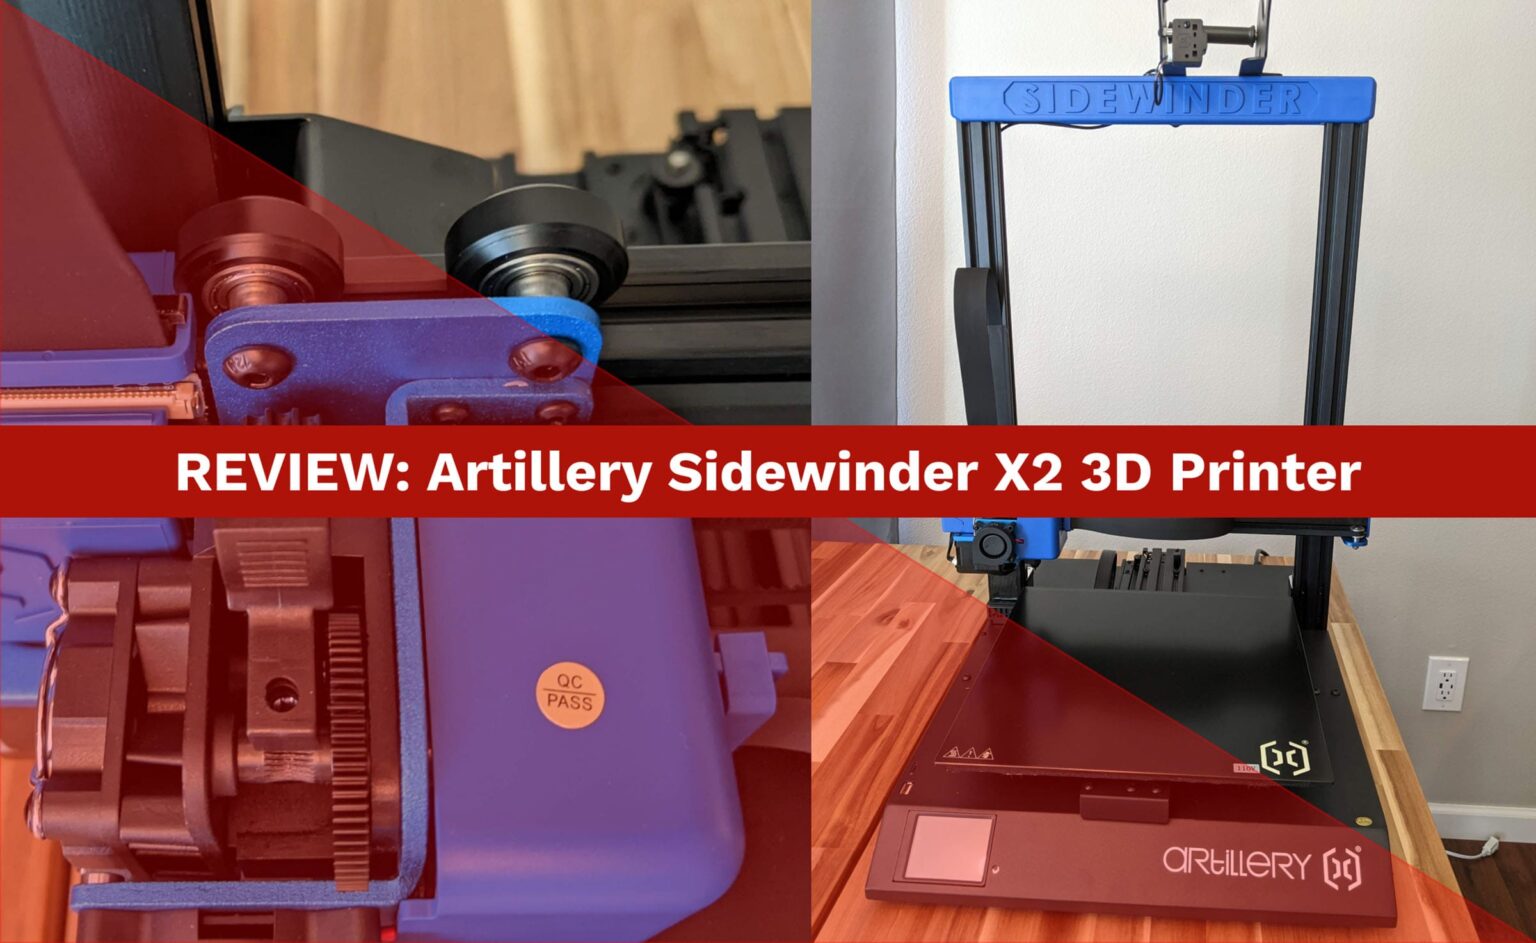 Detailed Review of the Artillery Sidewinder X2 3D Printer